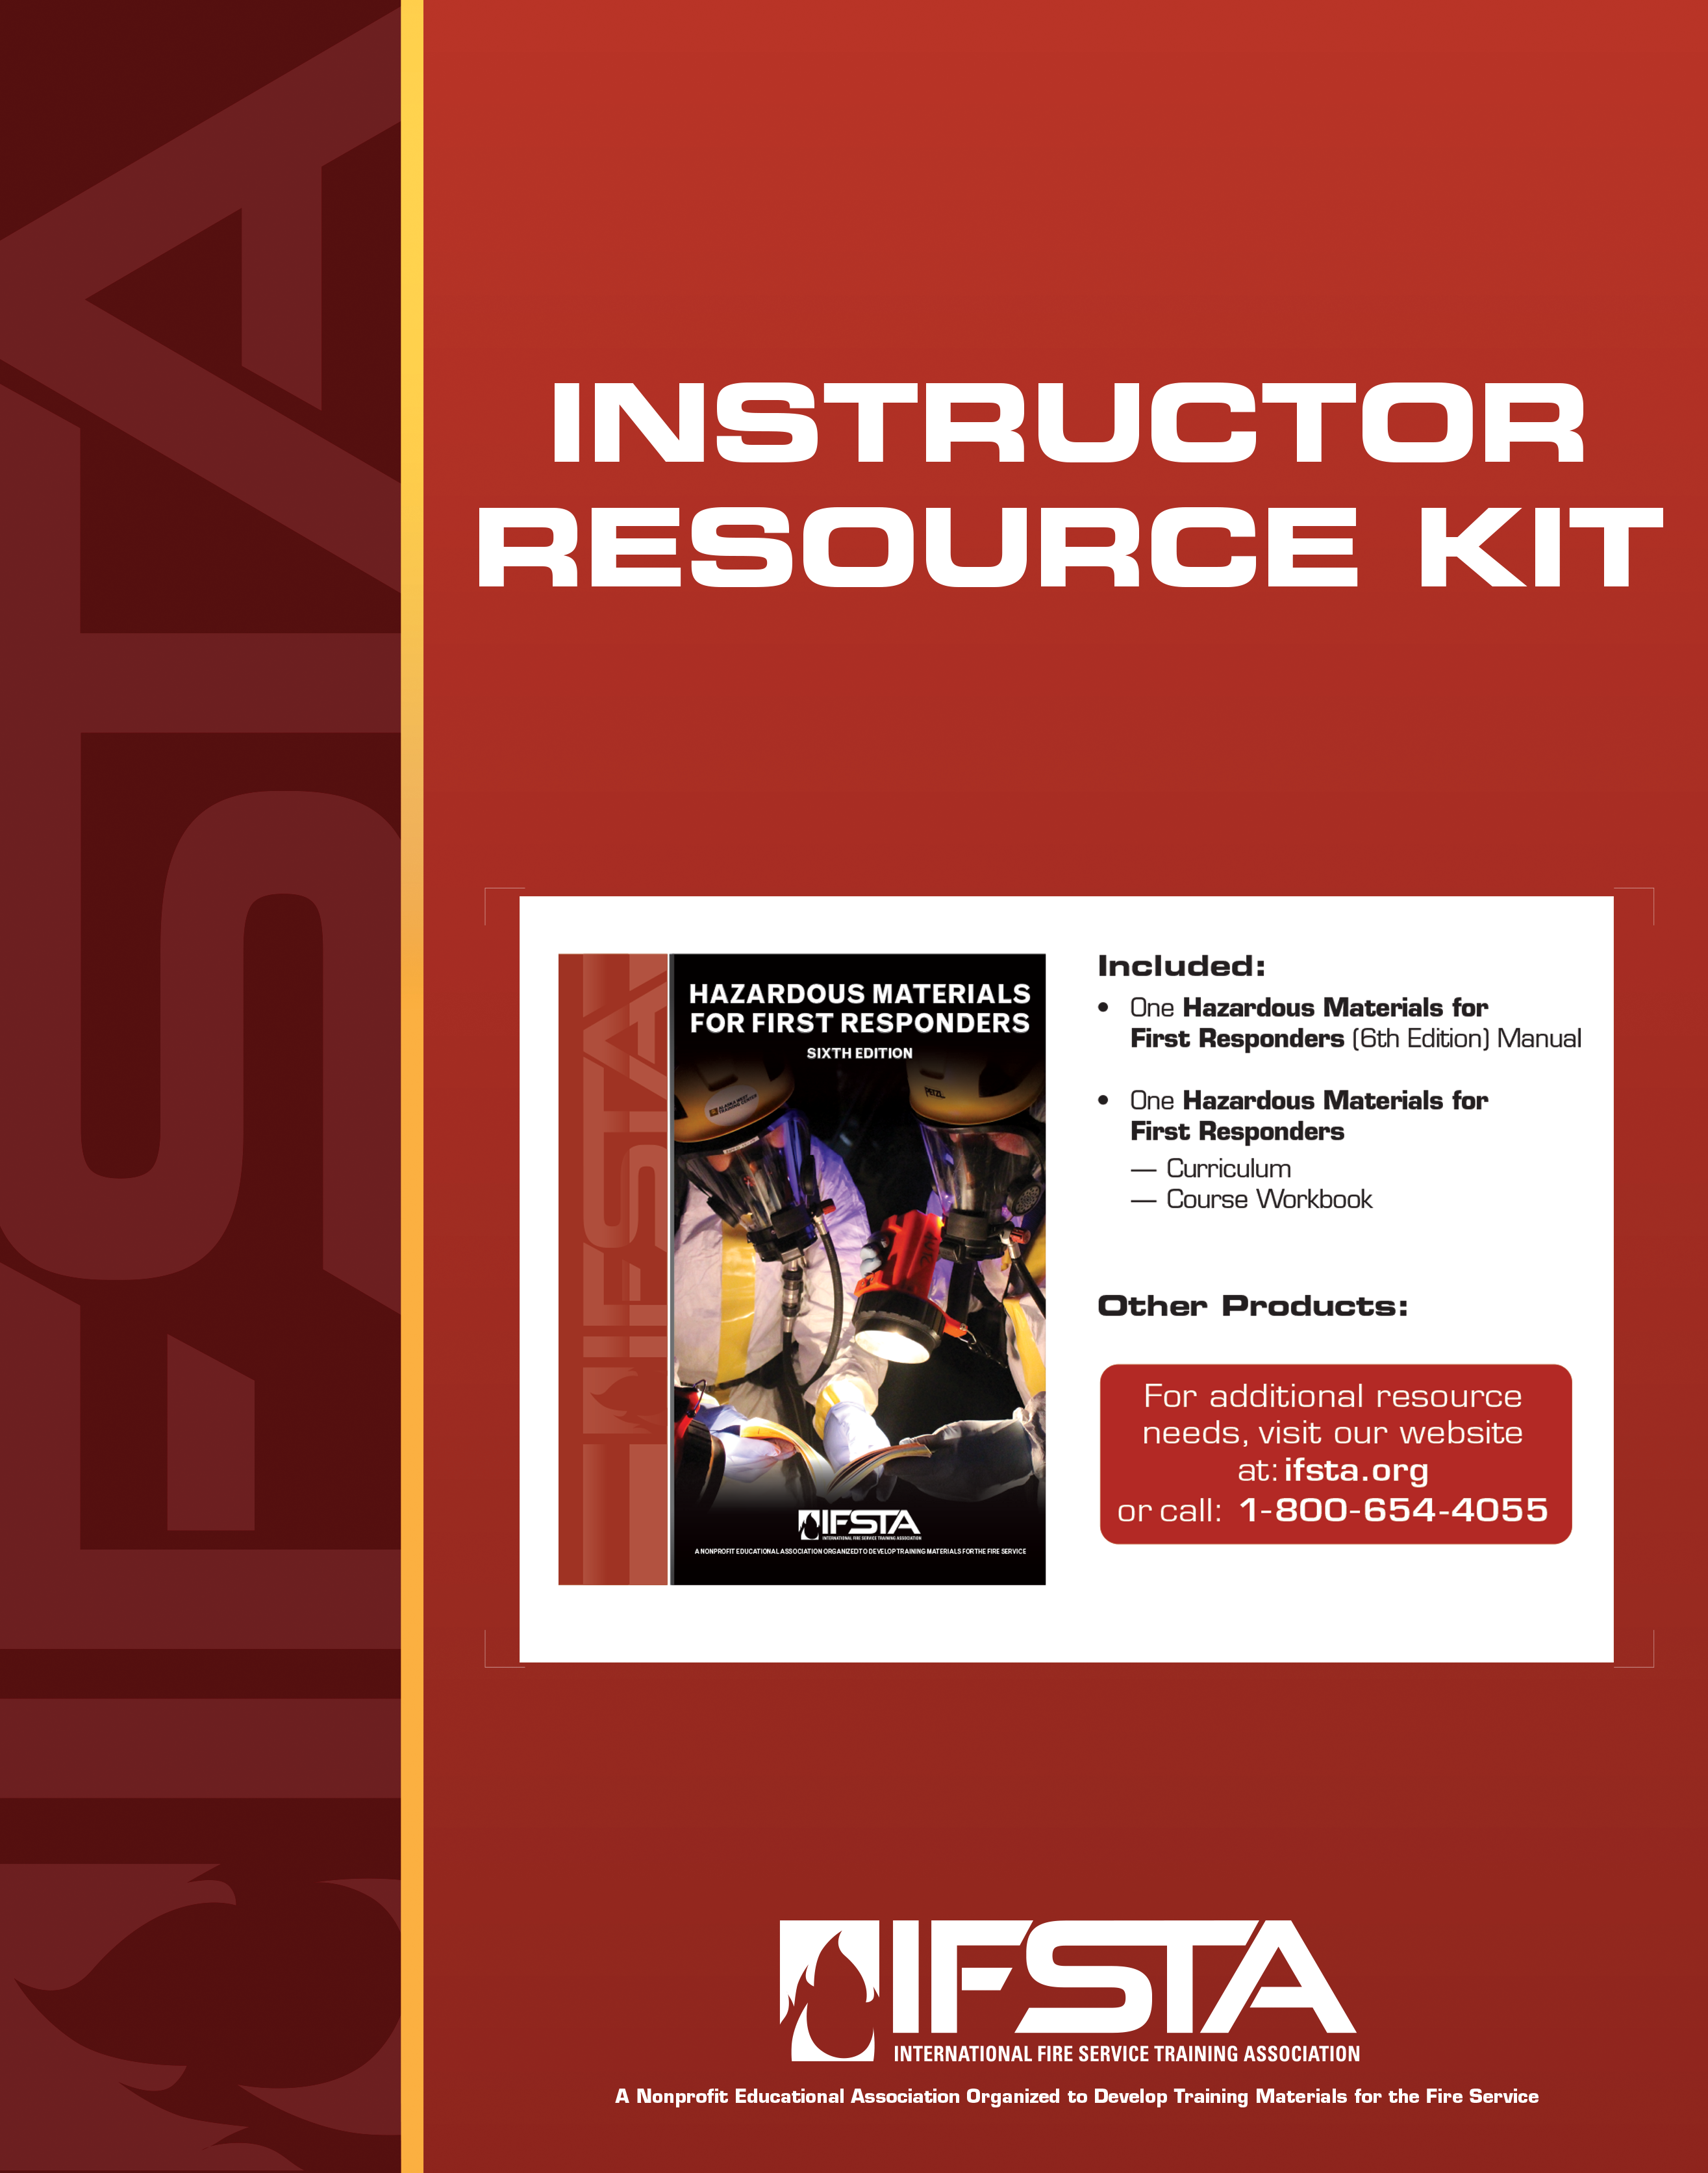 Hazardous Materials for First Responders, 6th Edition Instructor Resource Kit